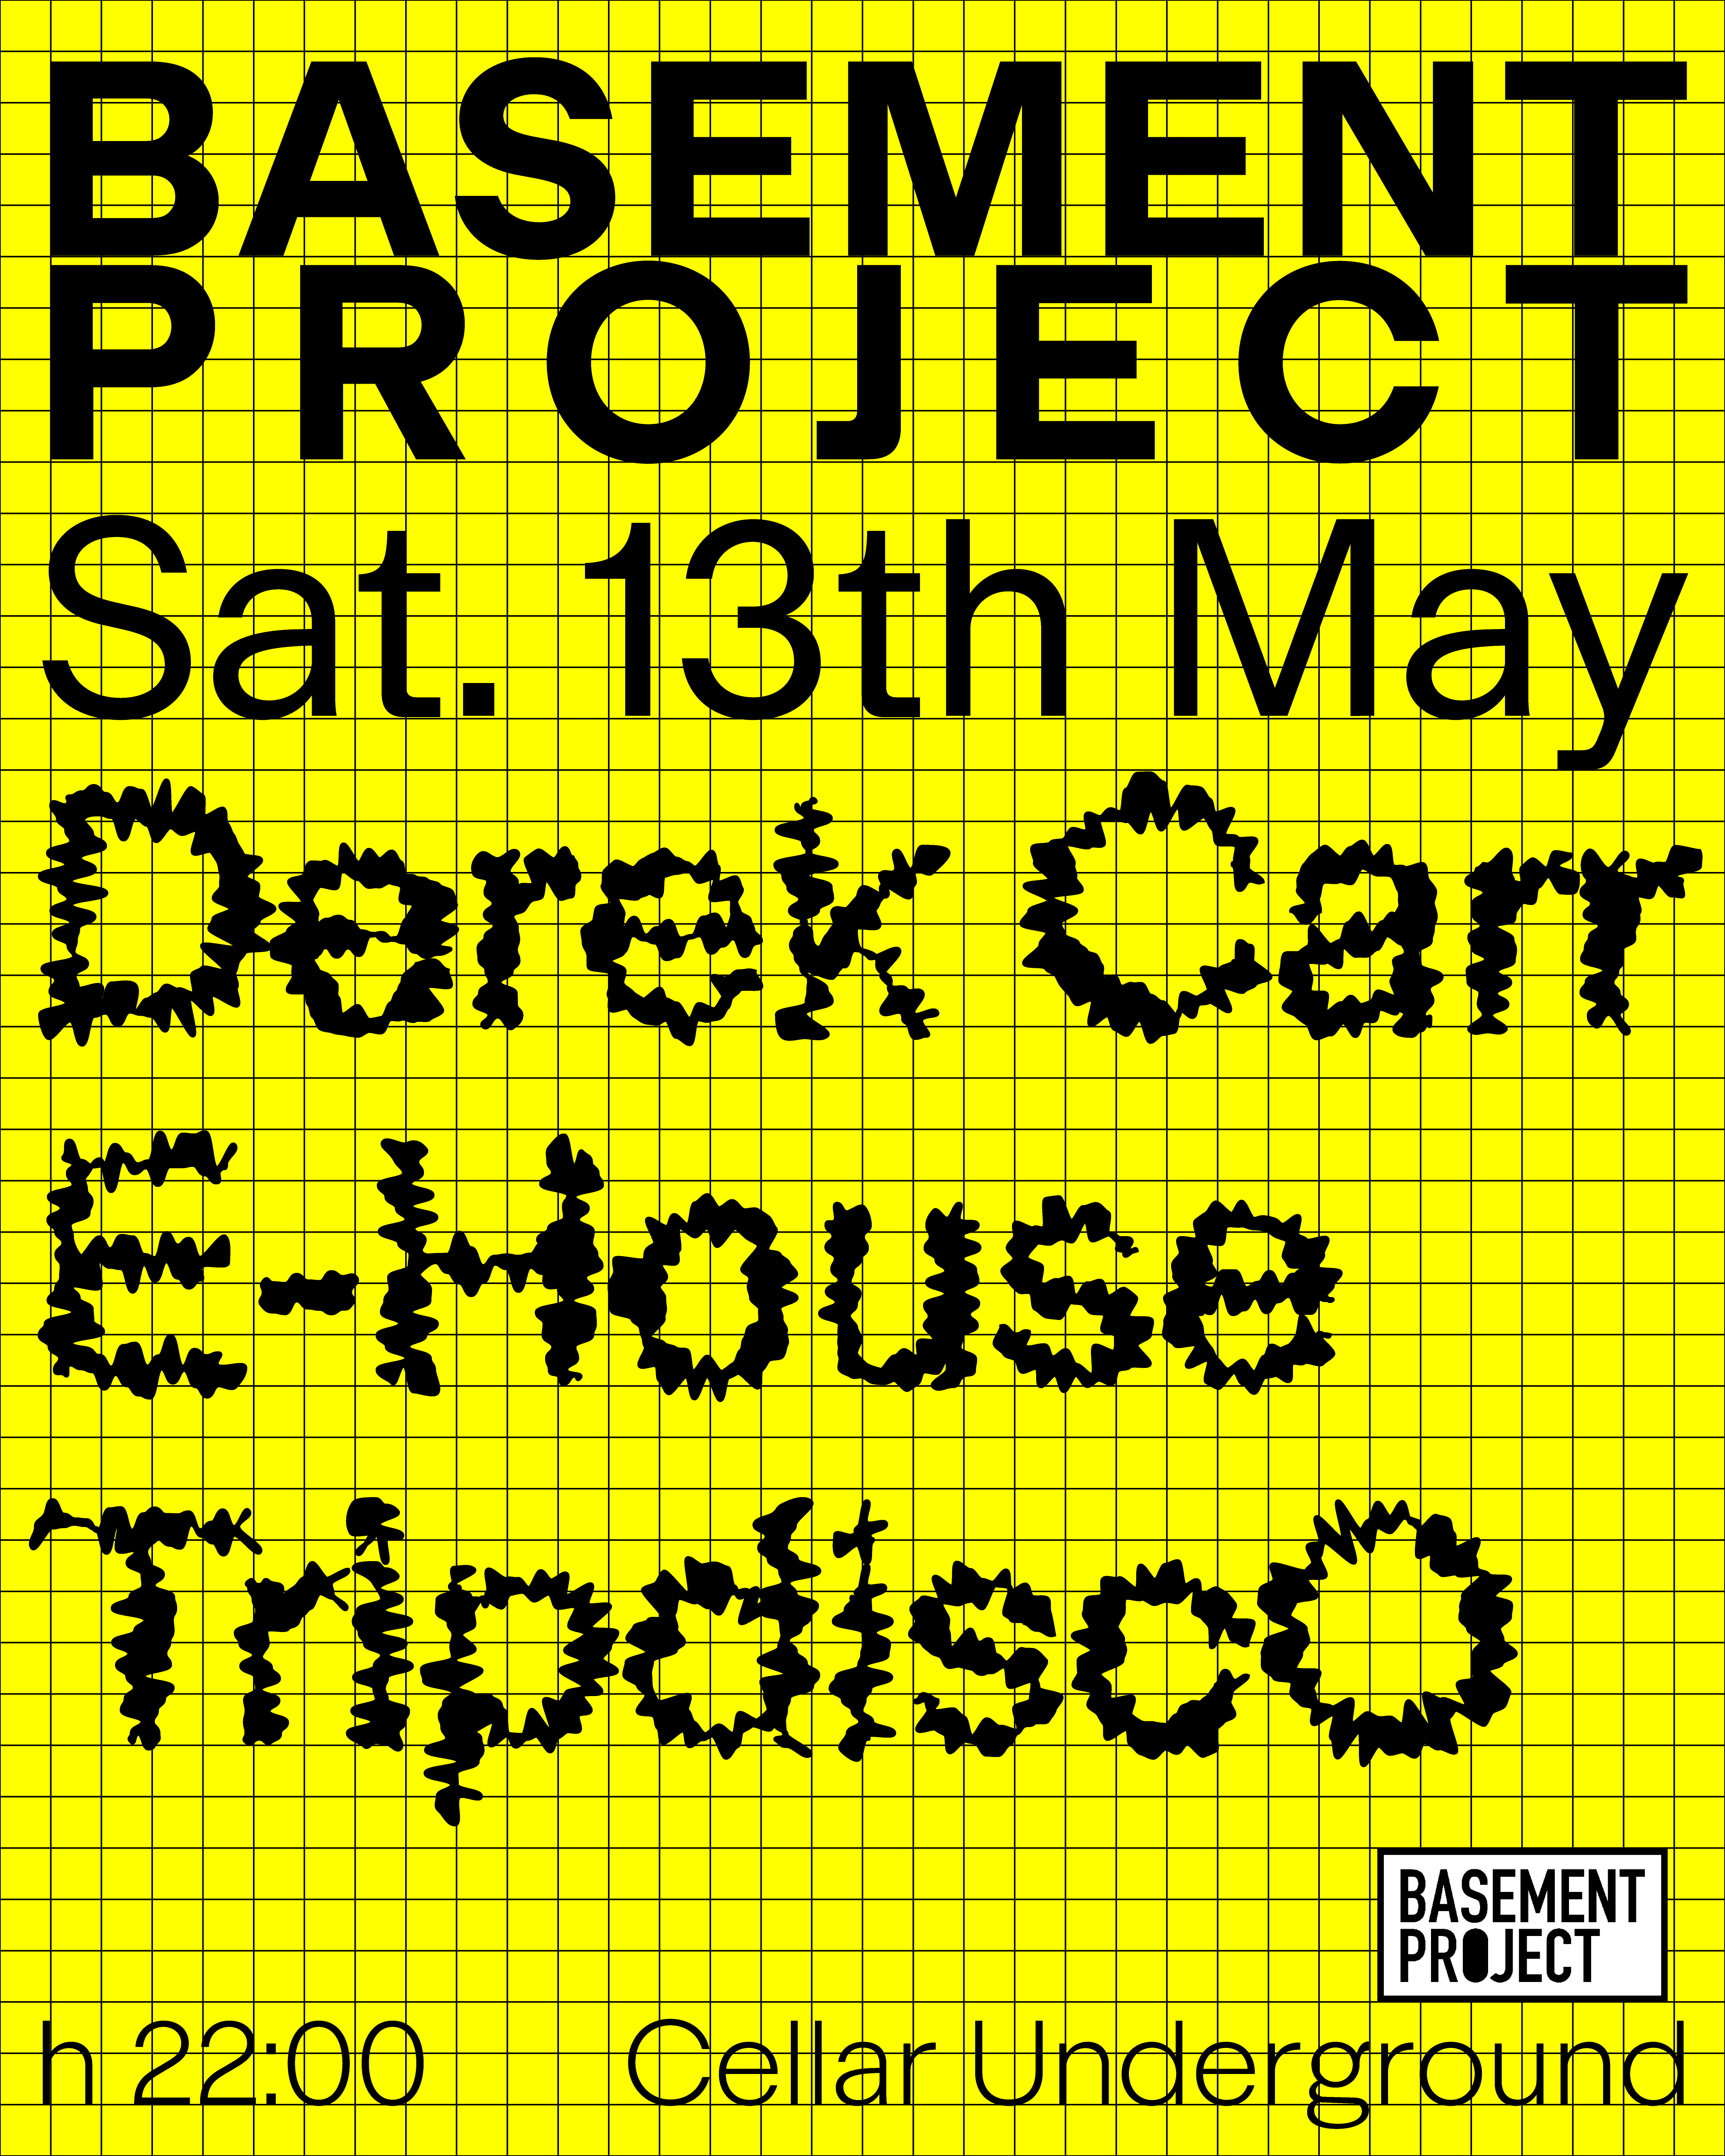 Basement Project with Derek Carr, E-House & TripdiscO - Página frontal